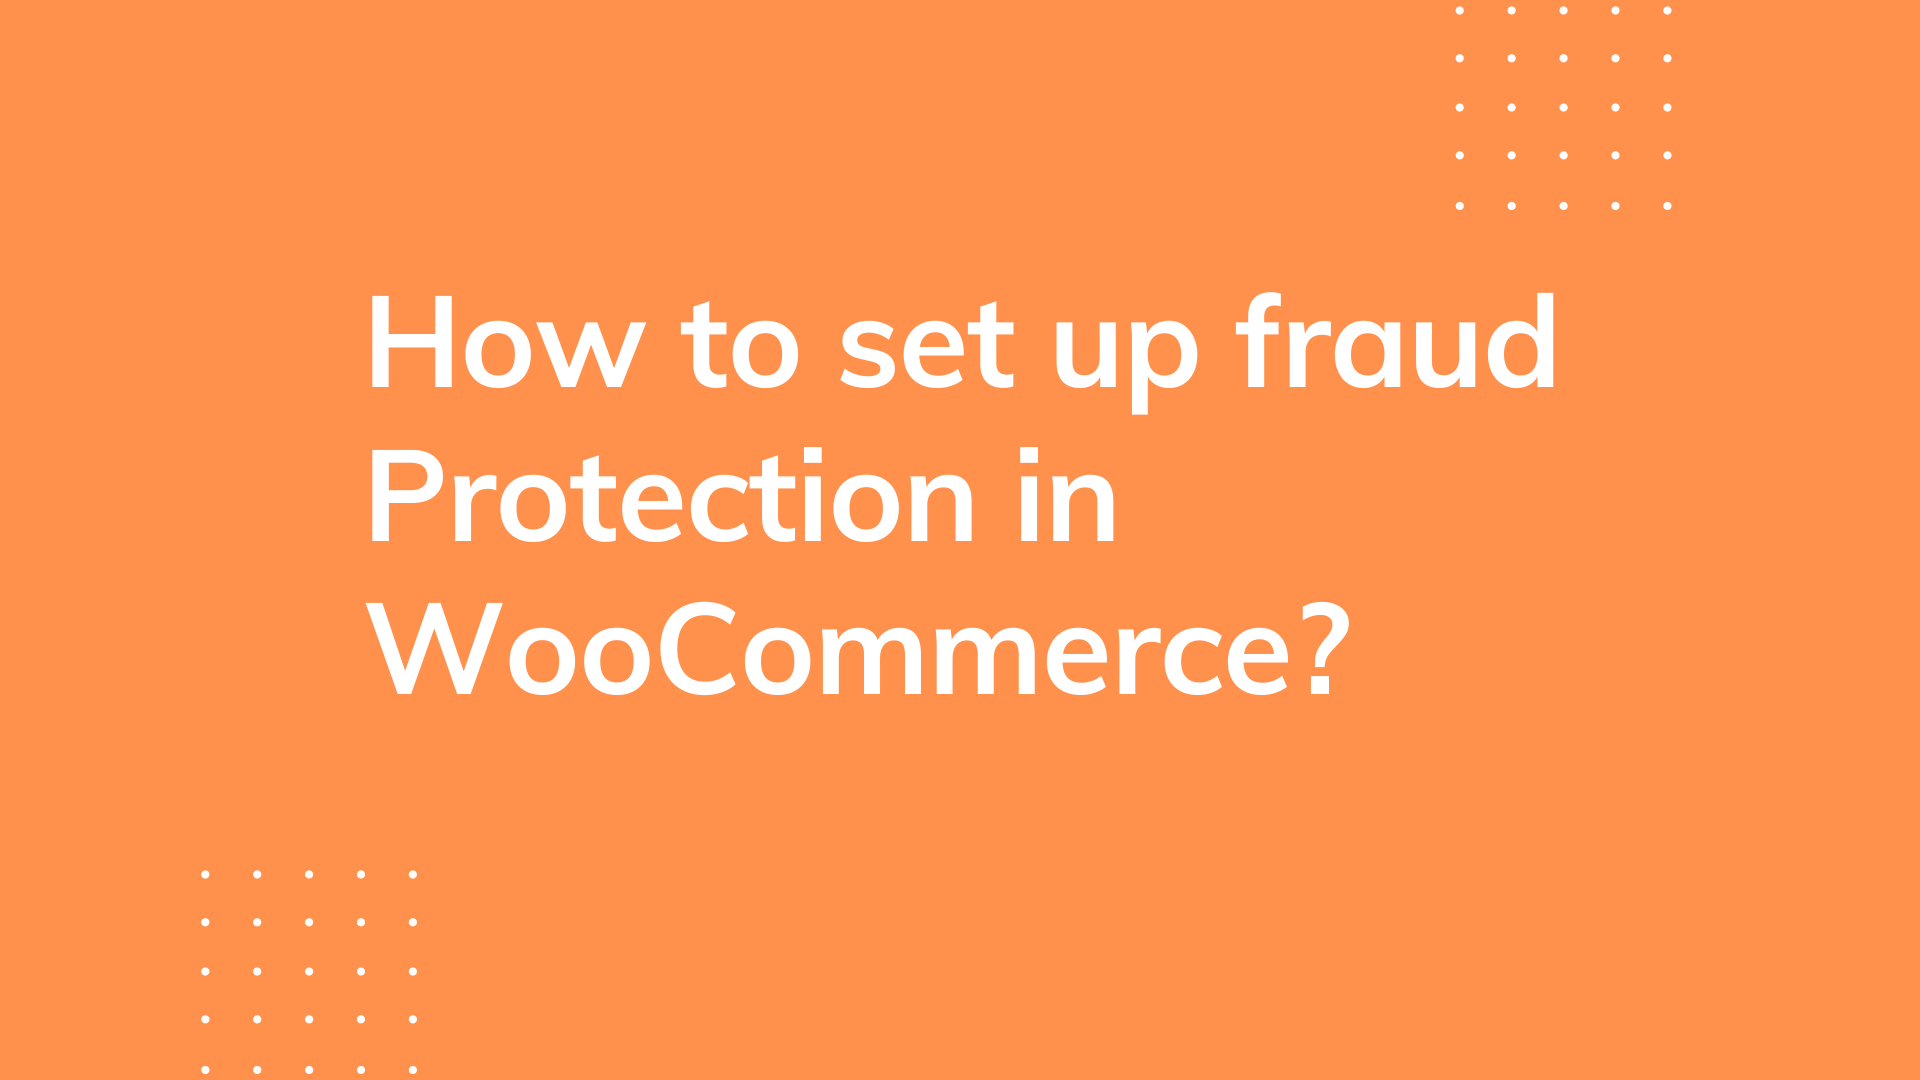 How to set up fraud Protection in WooCommerce?